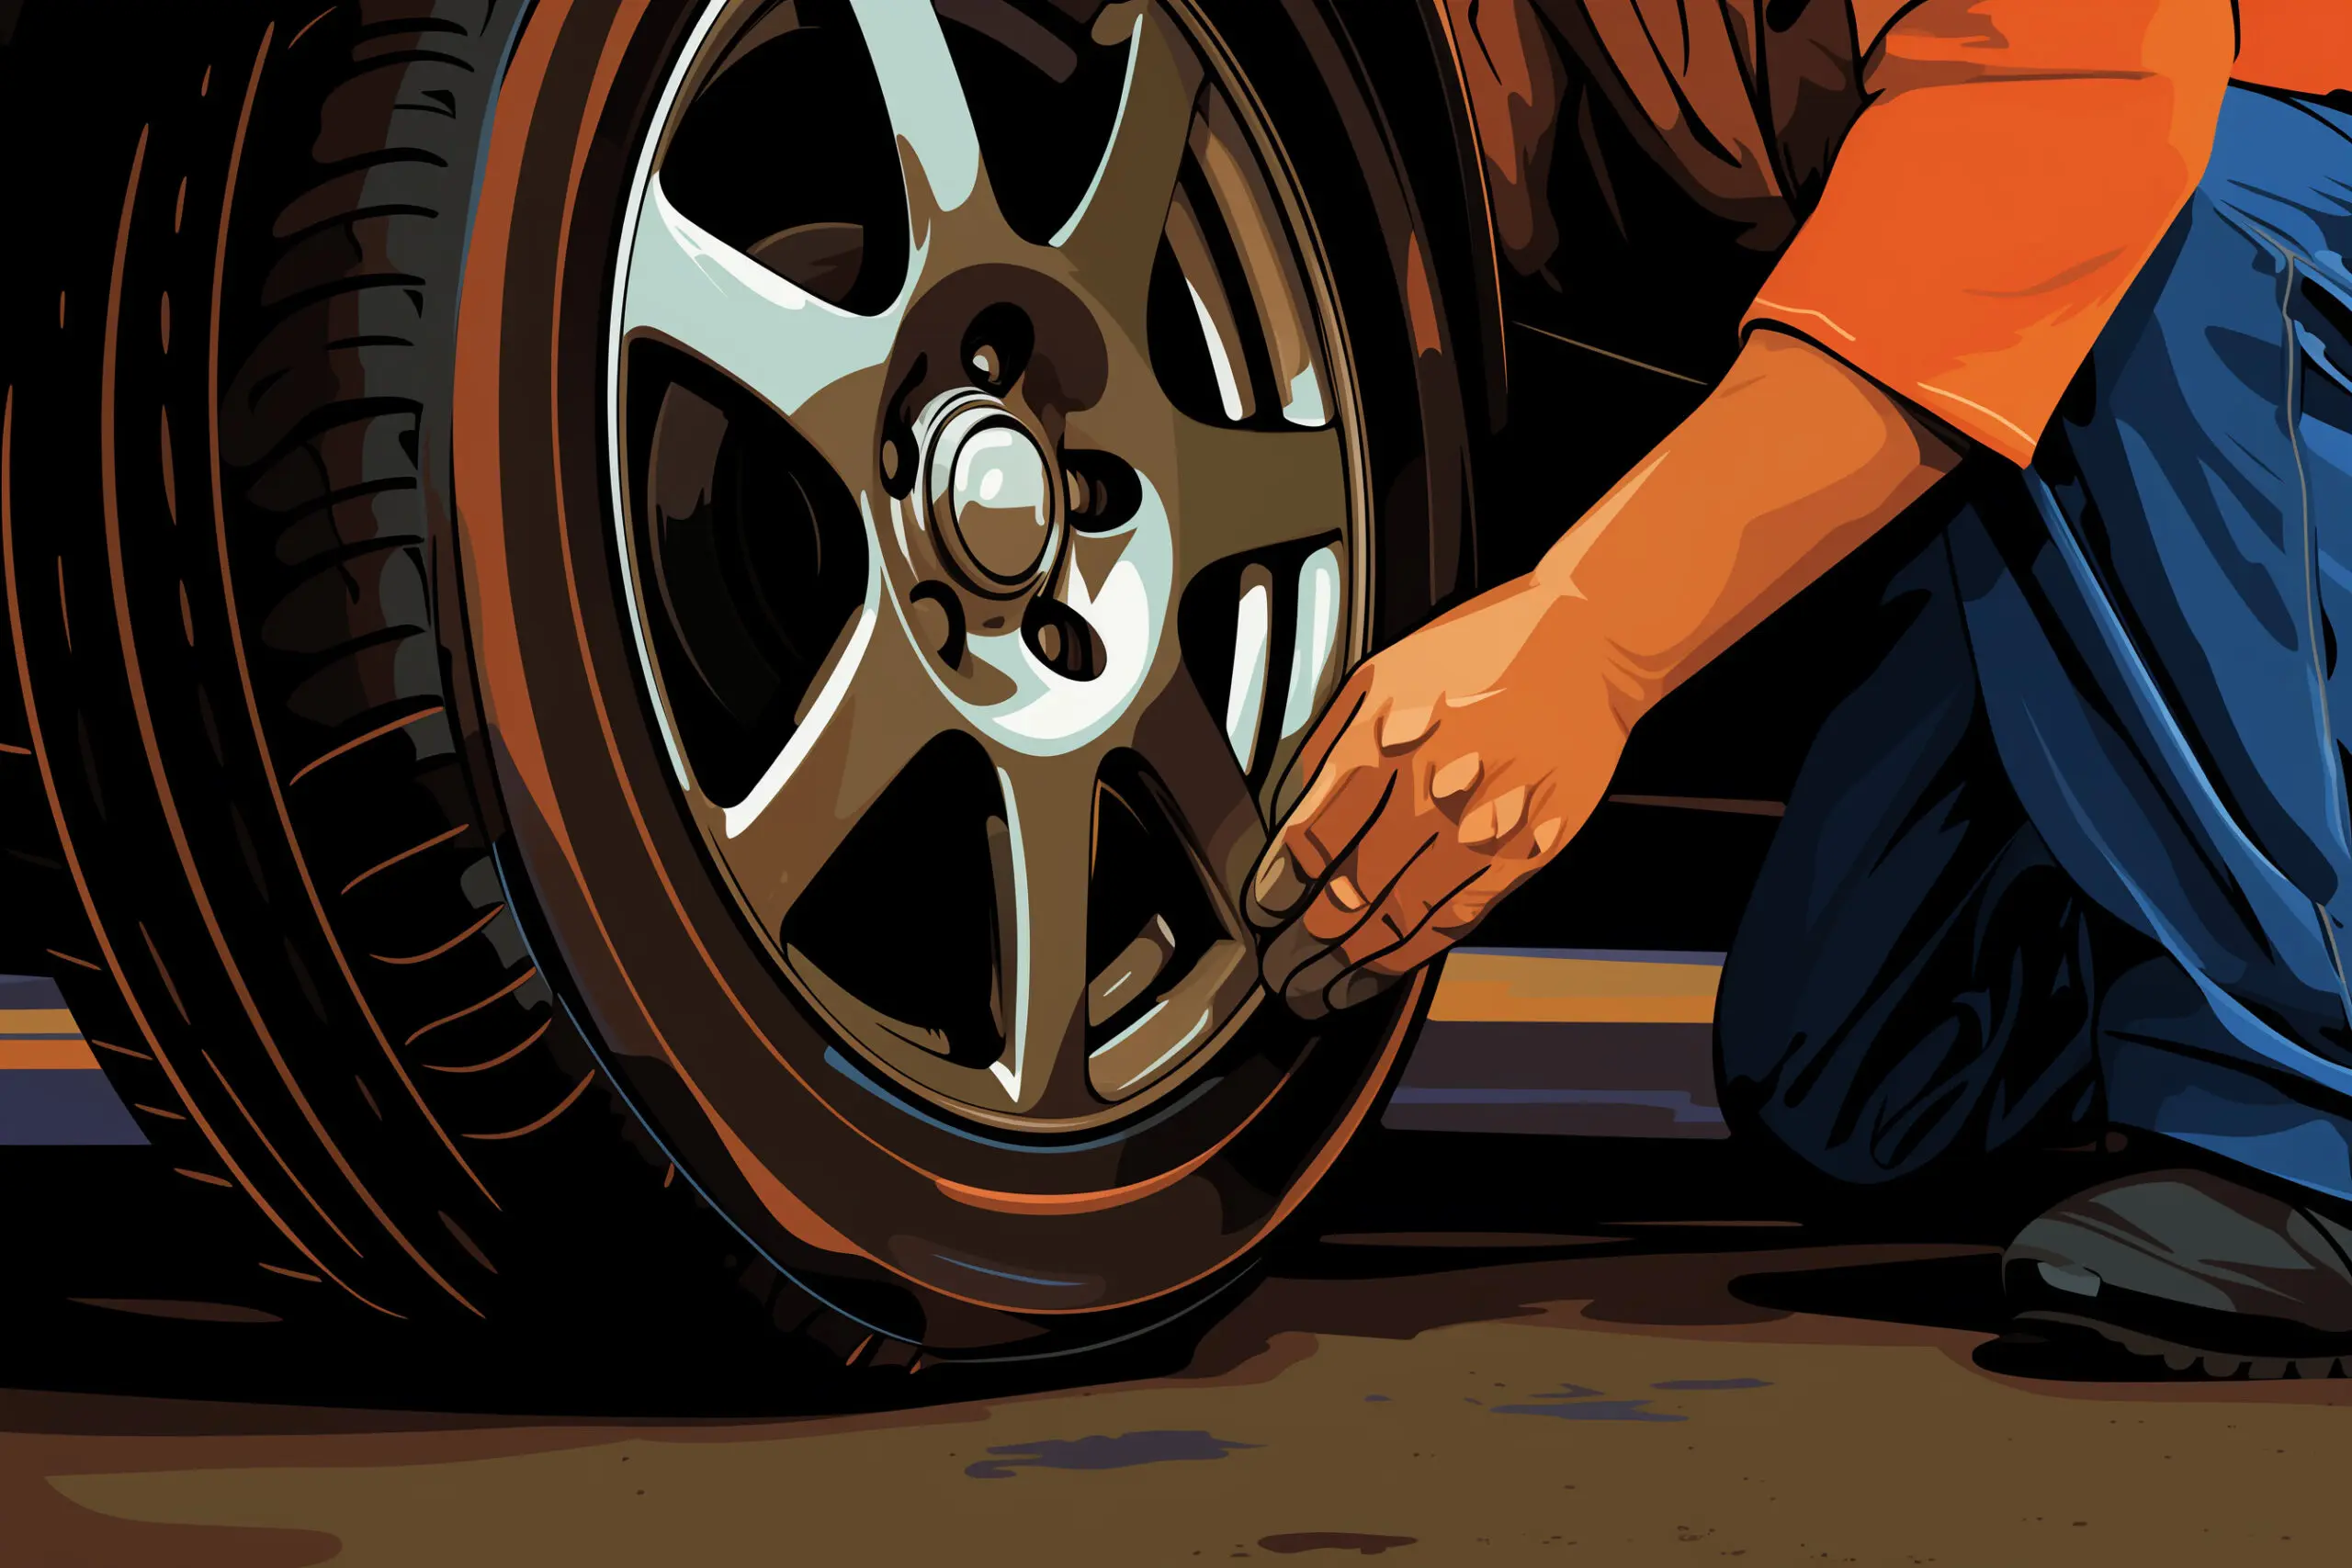 Best tire shine/application for tires with aggresive sidewalls